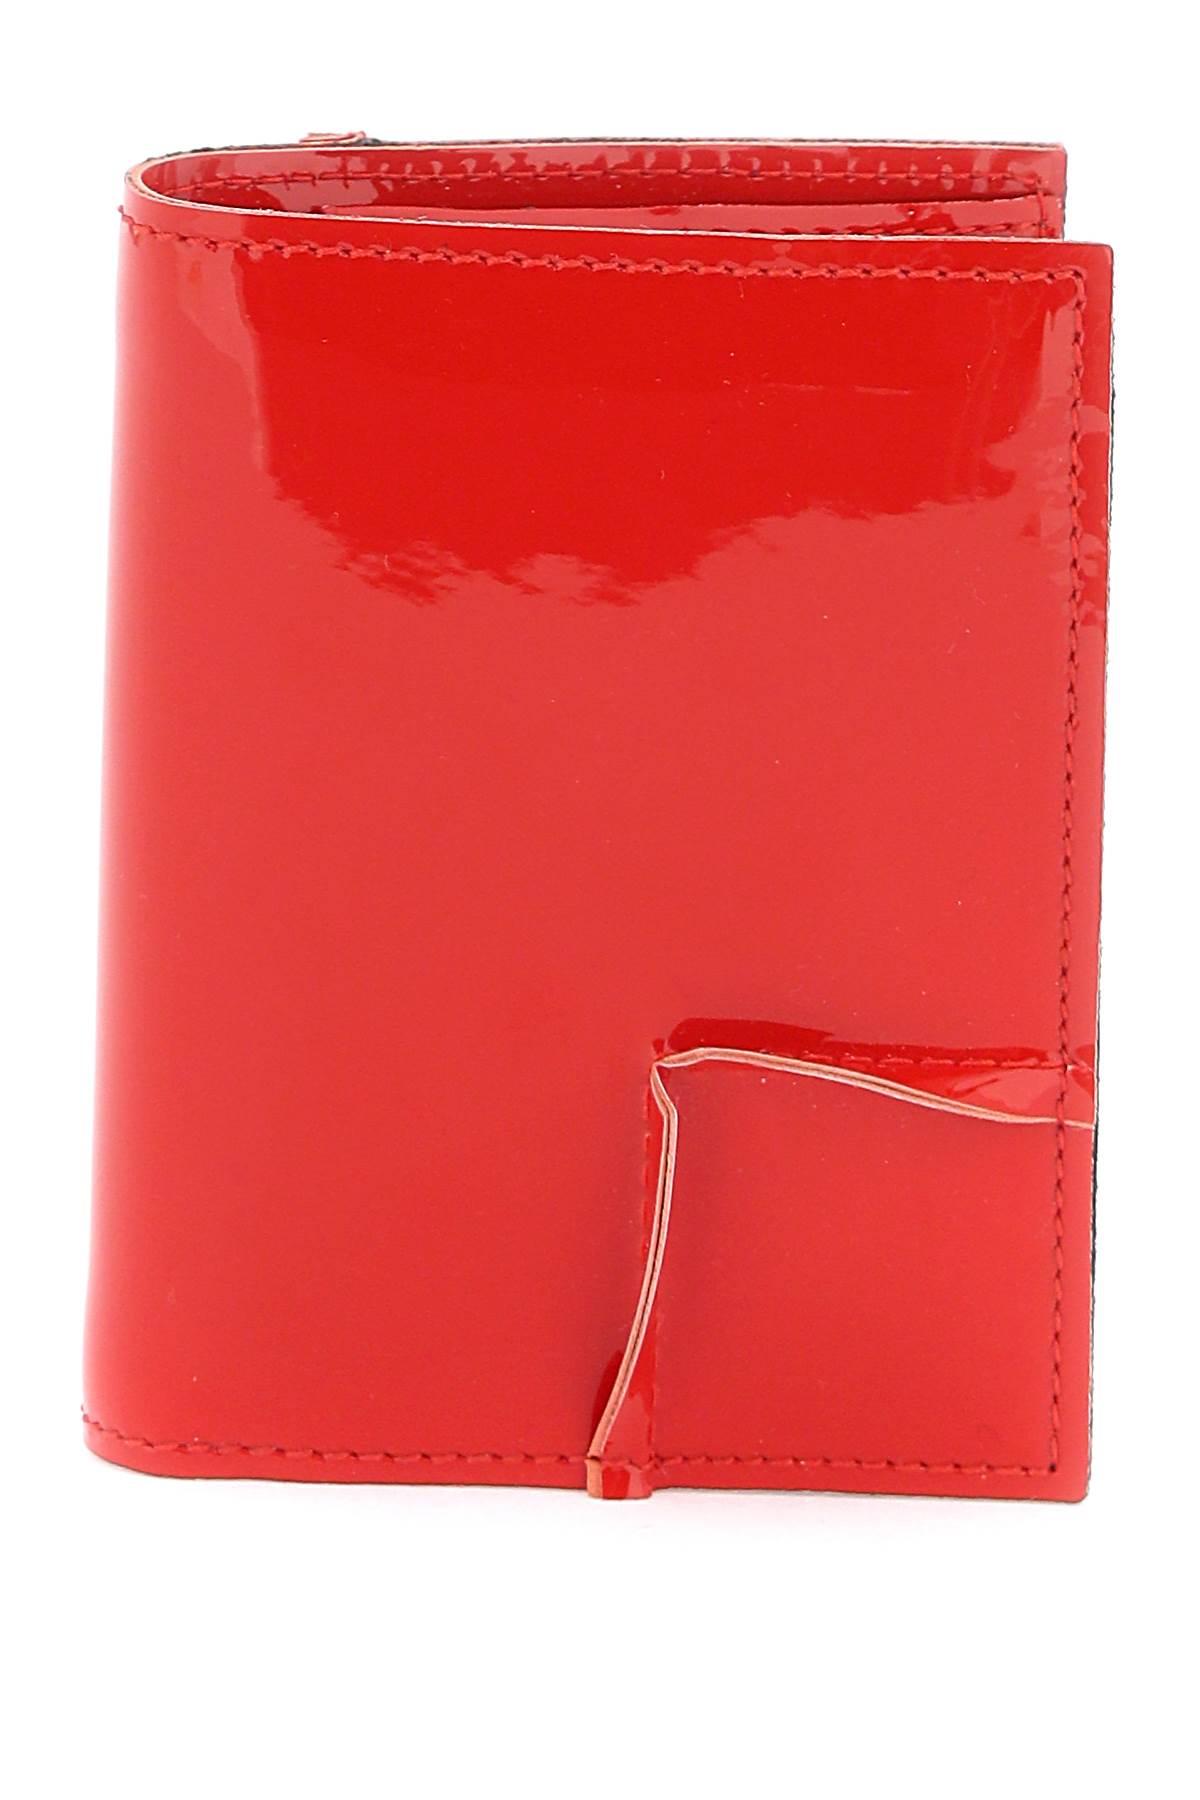 Comme des garcons wallet bifold patent leather wallet in-0